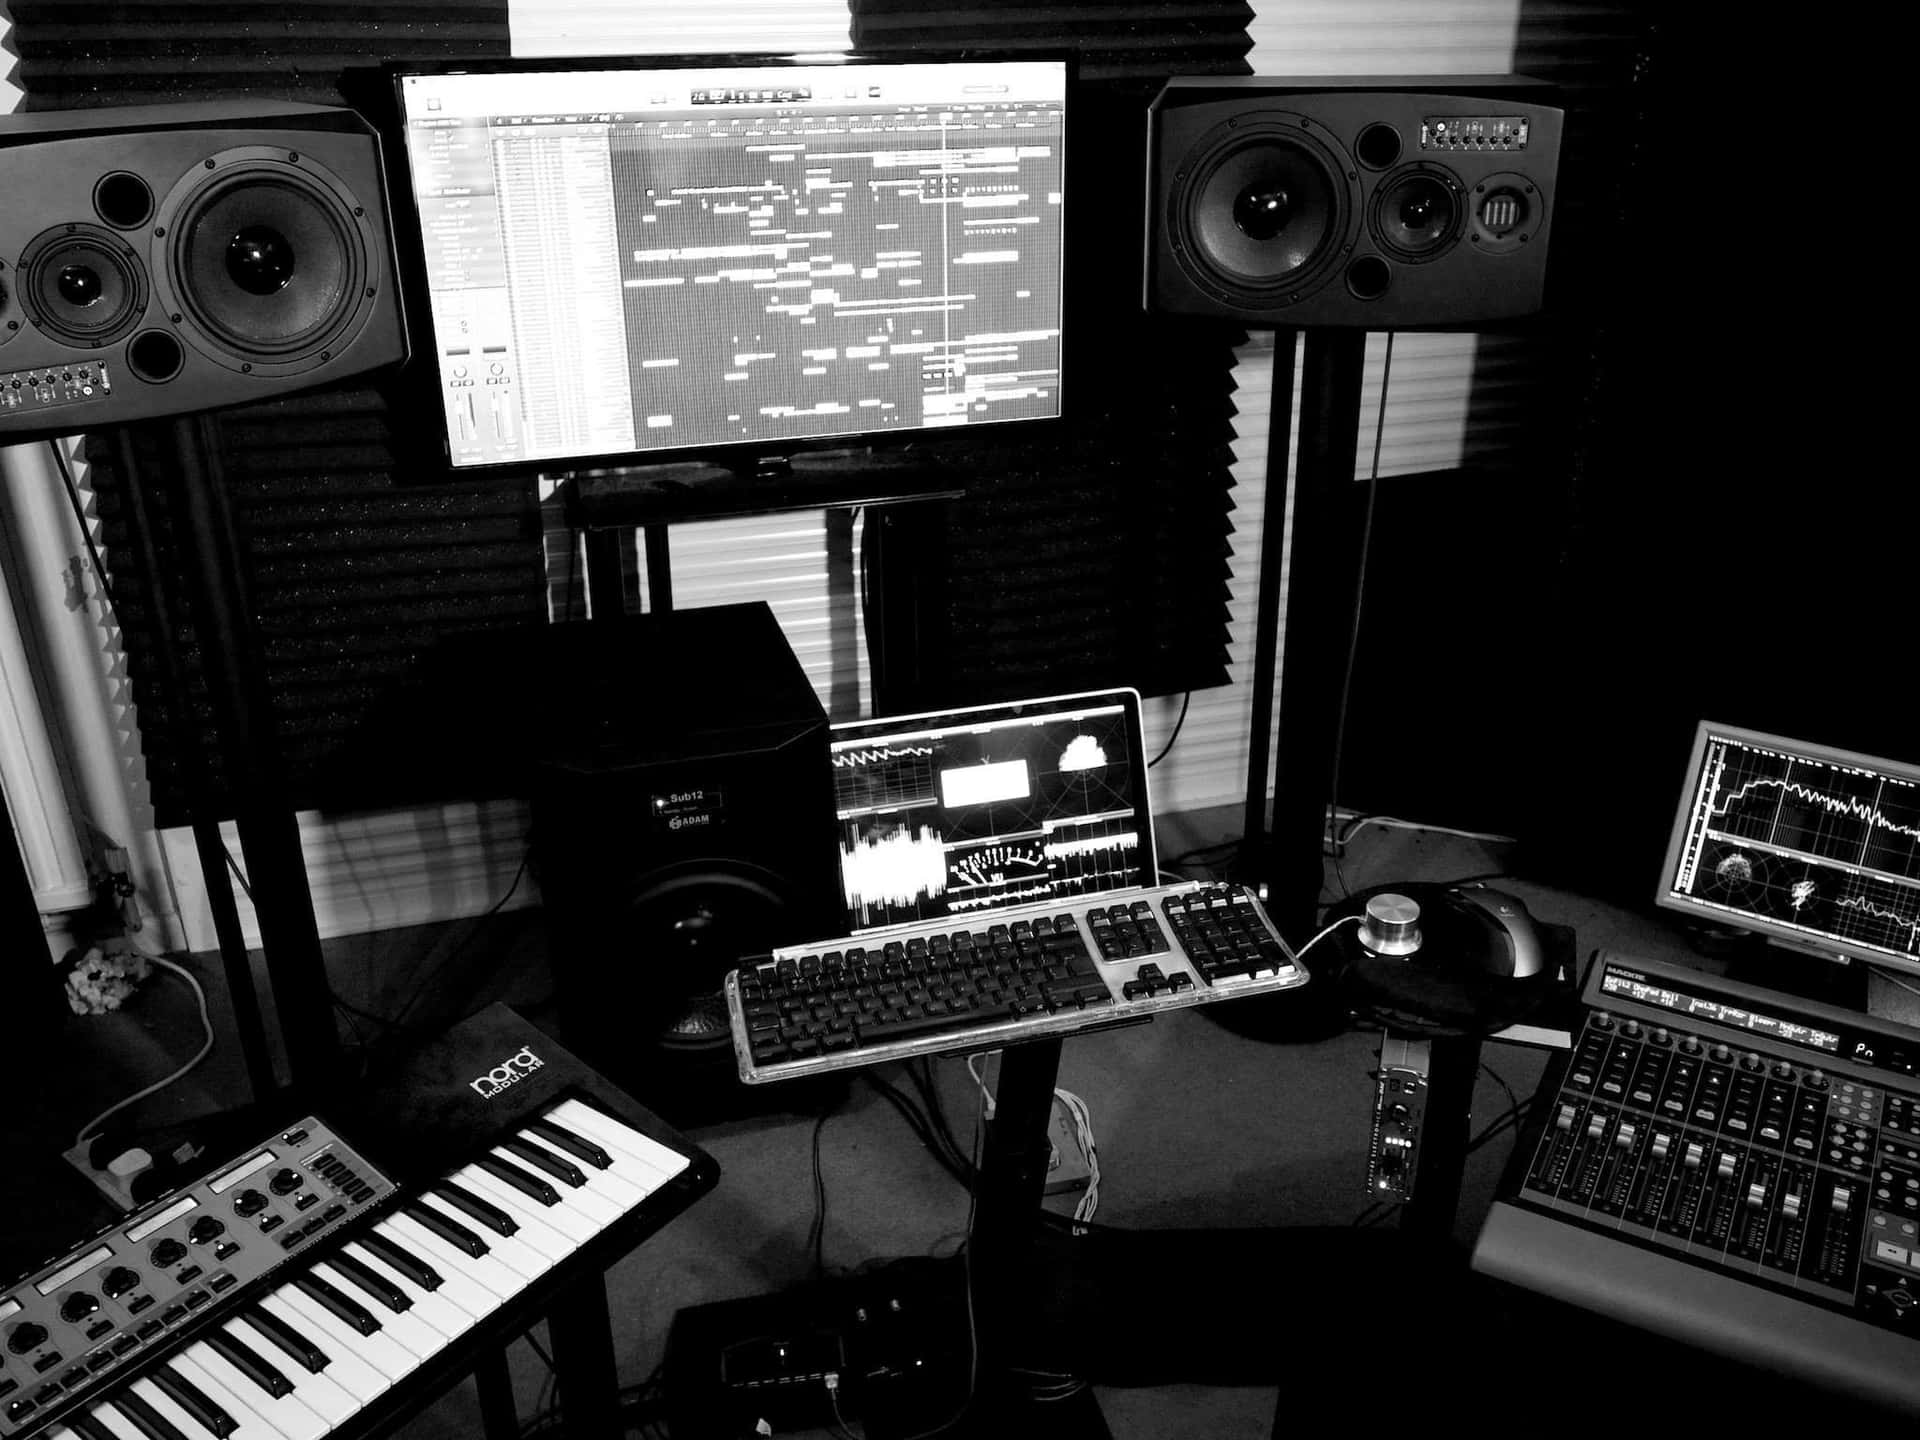 A Black And White Photo Of A Recording Studio With A Keyboard, Monitor, And Other Equipment